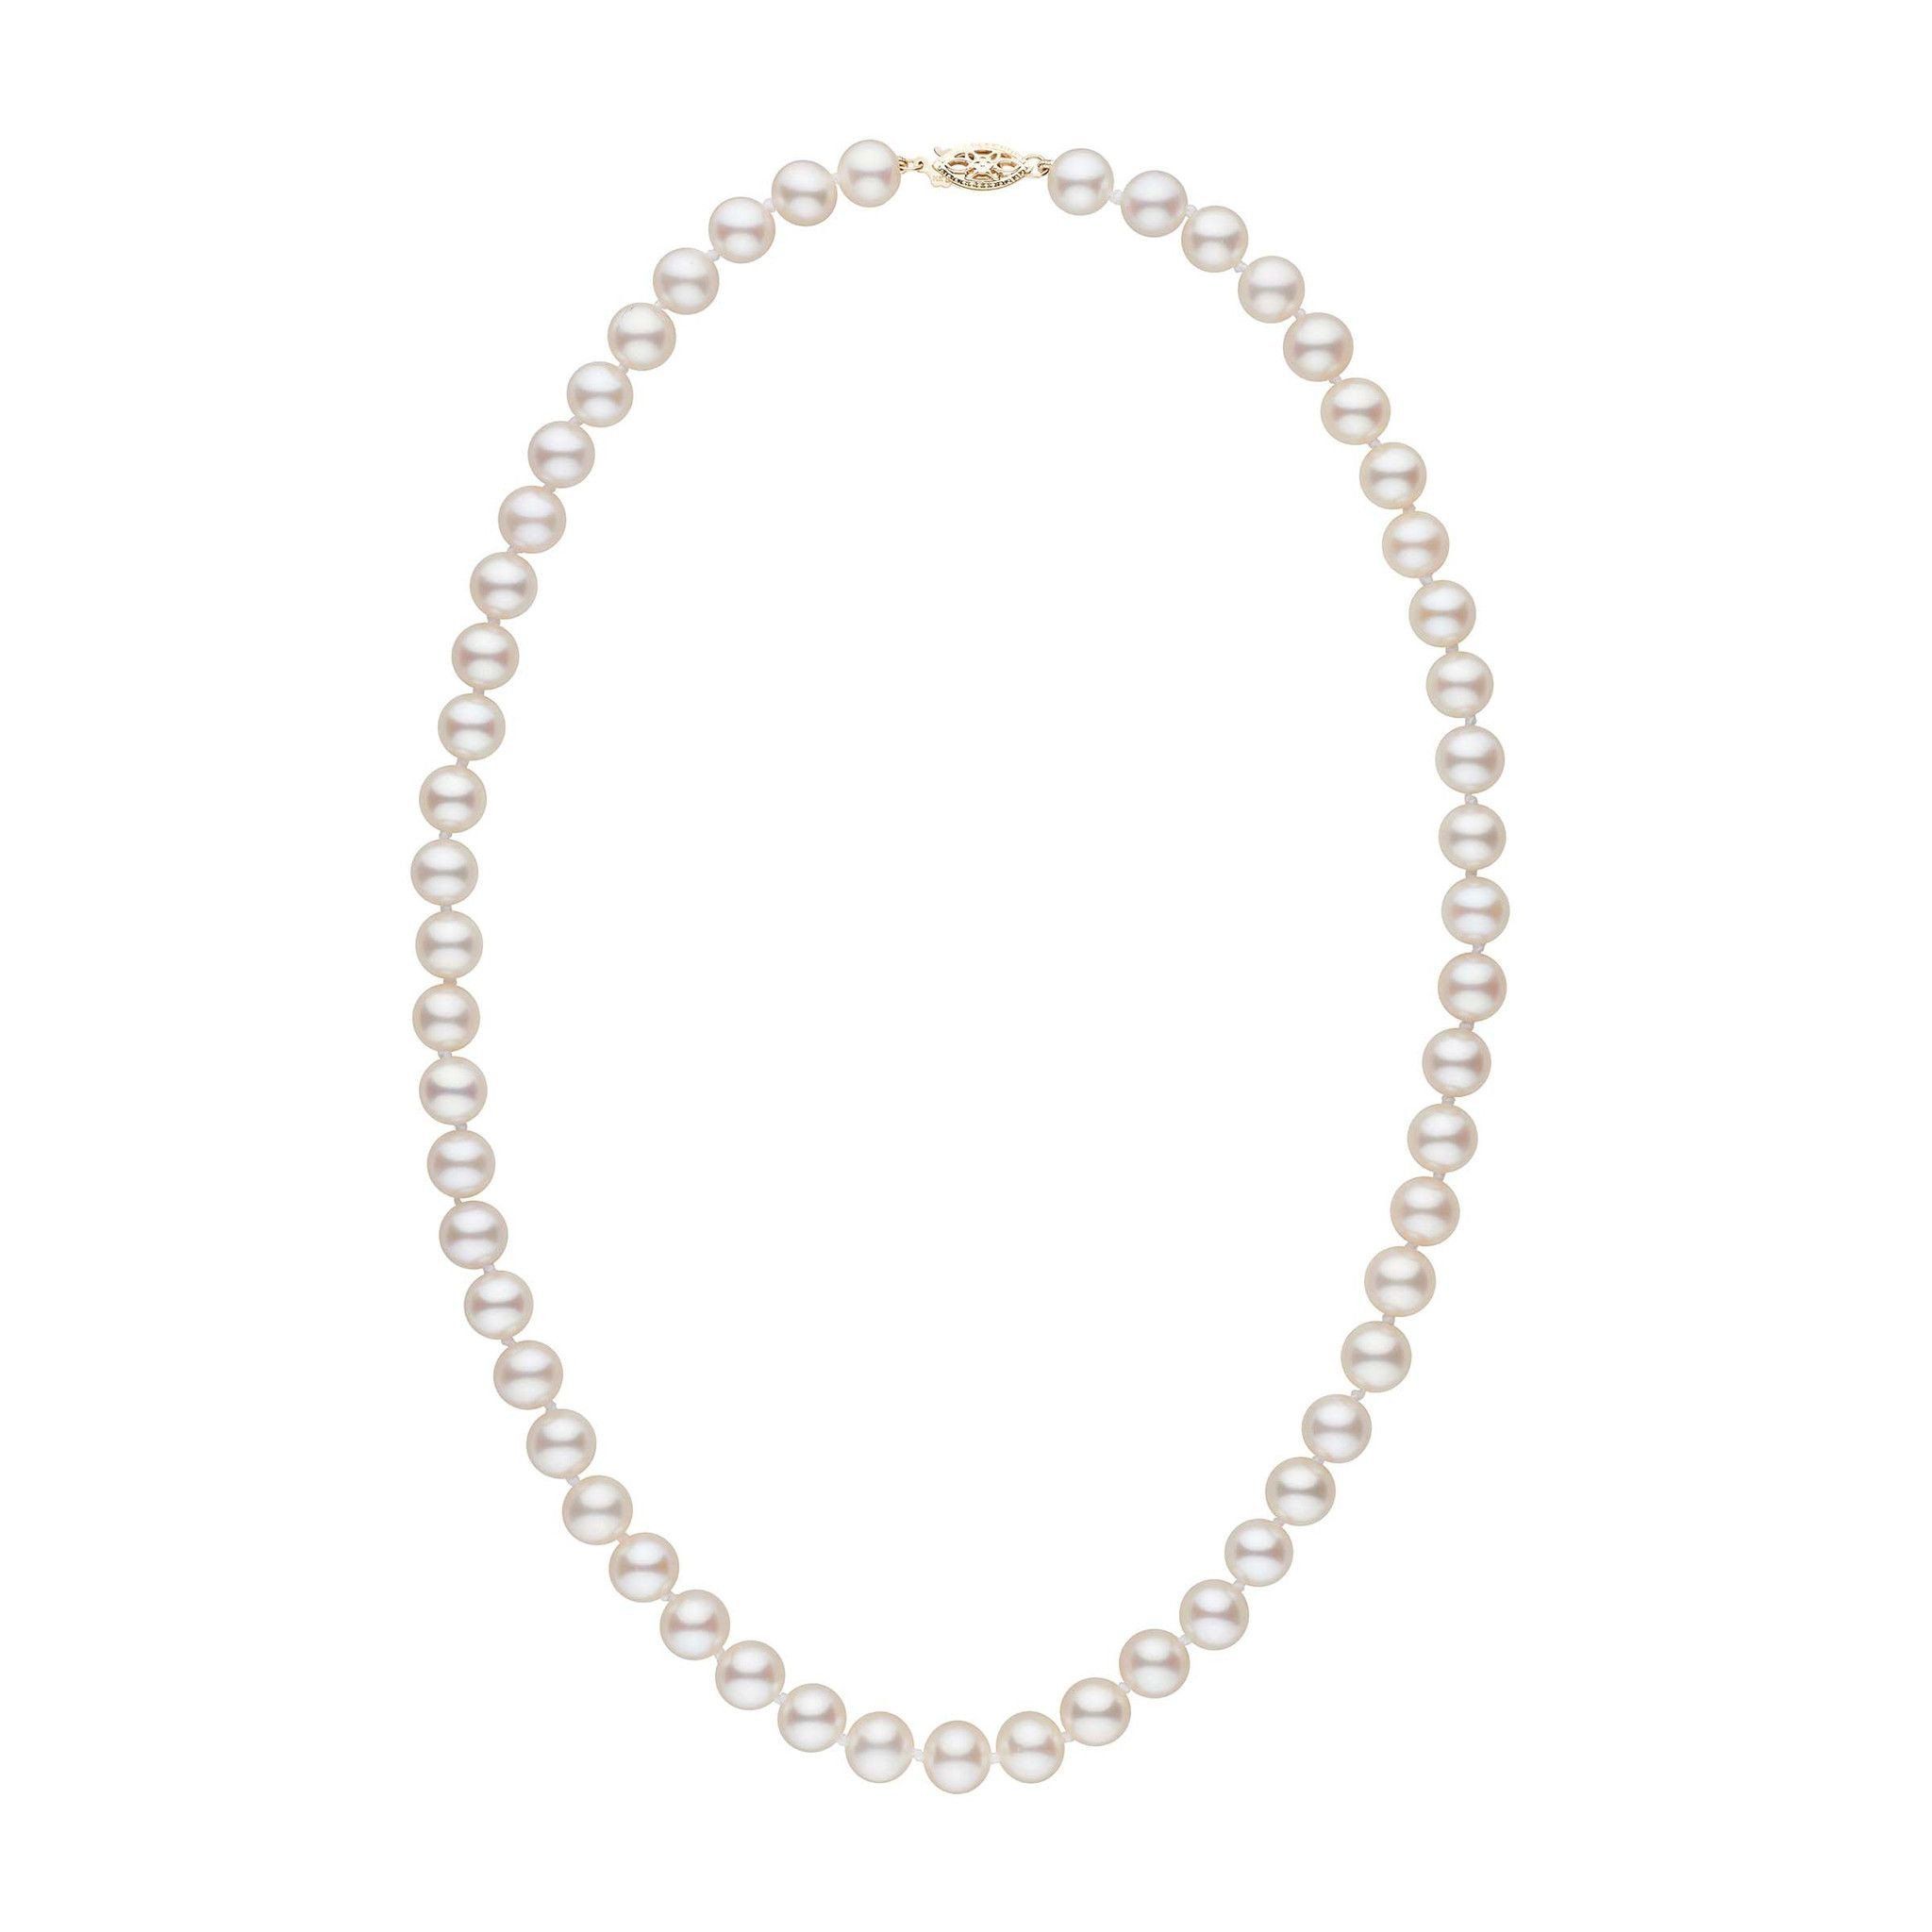 7.5-8.0 mm 18 Inch AA+ White Freshwater Pearl Necklace